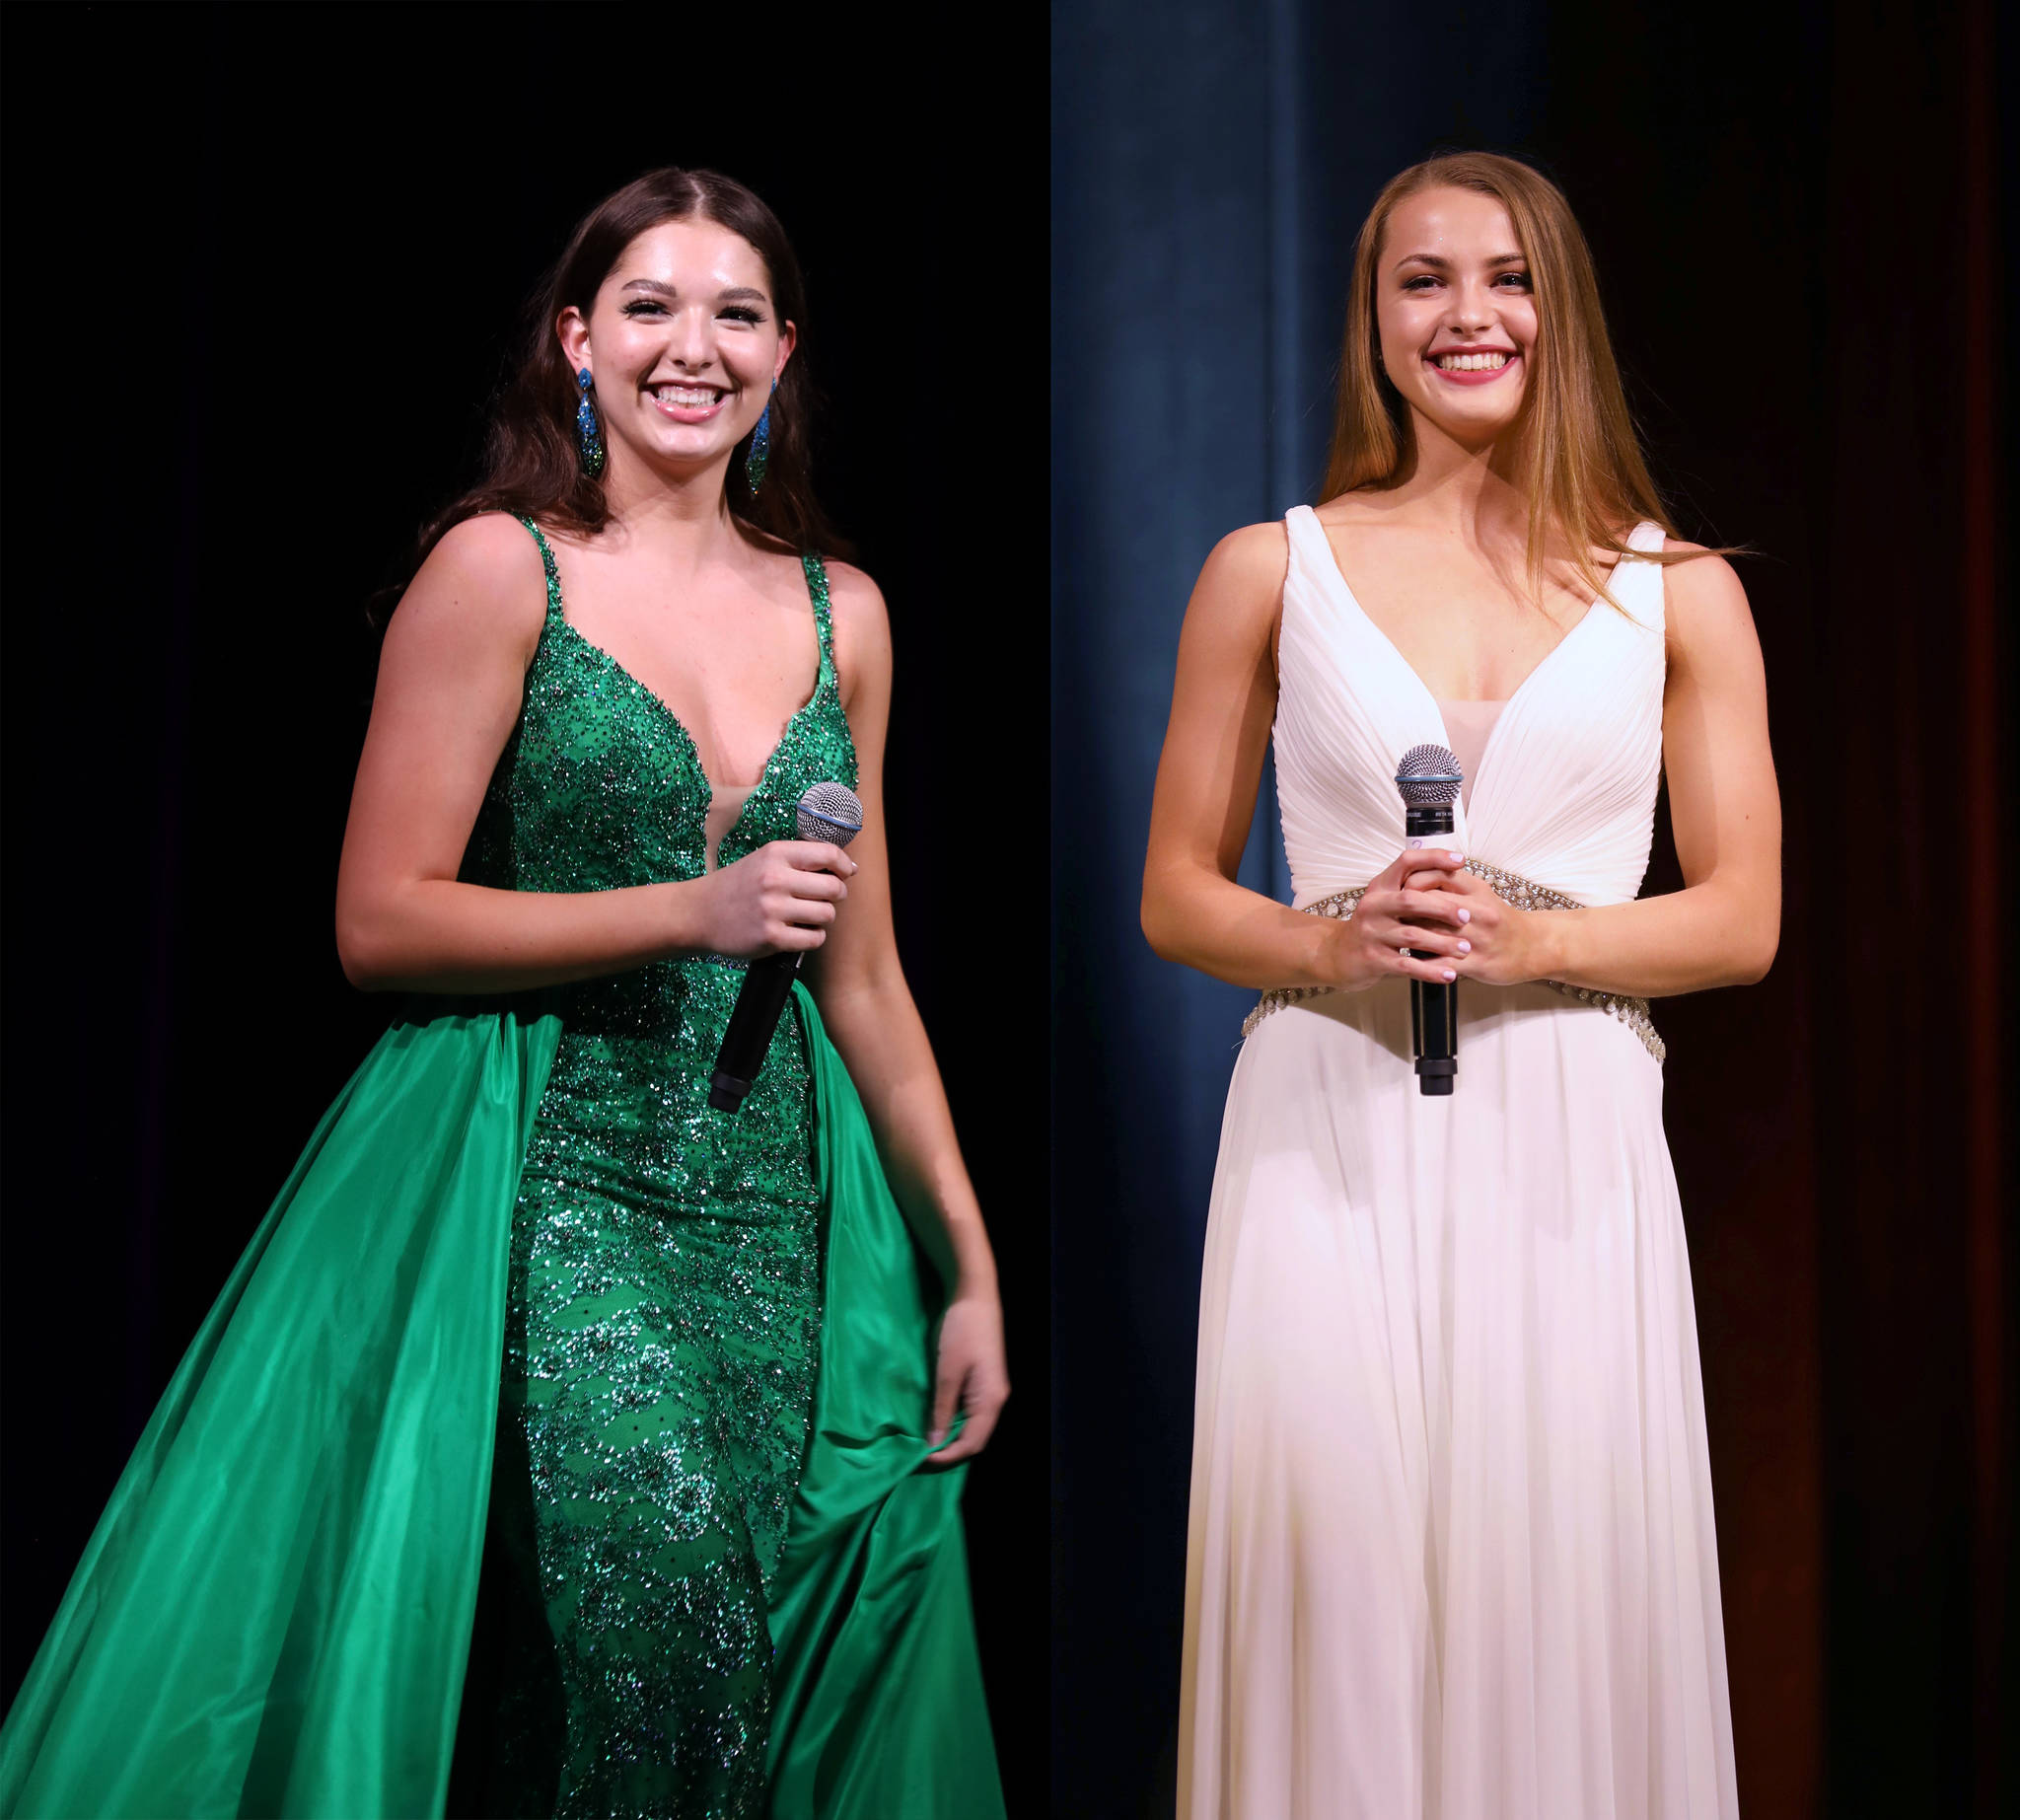 Left: Miss Grays Harbor’s Outstanding Teen, Sofia Da Silva of Montesano, was named 3rd runner-up. Right: Miss Bowerman Basin’s Outstanding Teen, Ellie Winkleman of Hoquiam, was awarded the Director’s Award, and the Seeking Sponsors Award. (Photo by Keith Krueger)